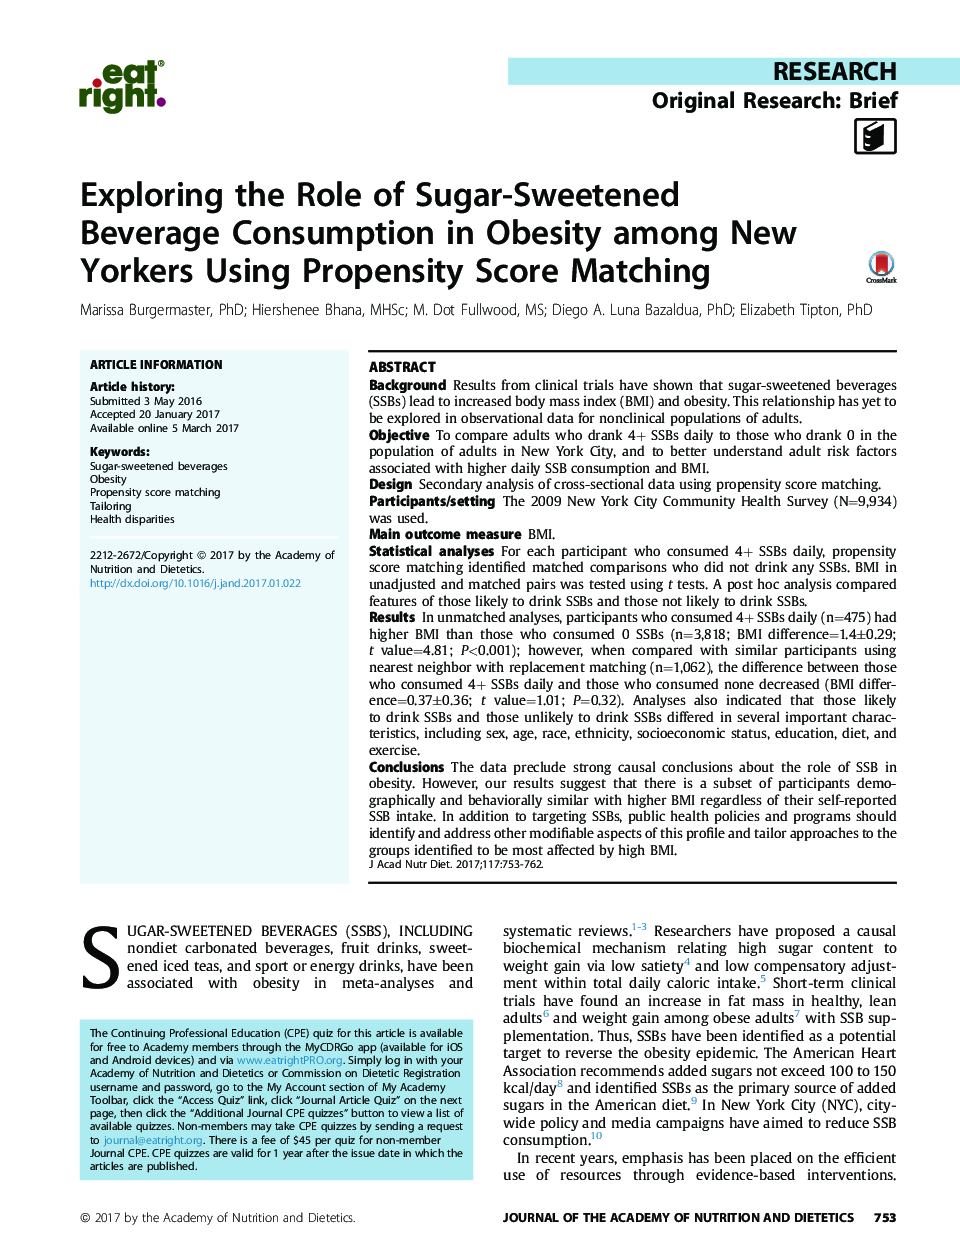 Exploring the Role of Sugar-Sweetened Beverage Consumption in Obesity among New Yorkers Using Propensity Score Matching